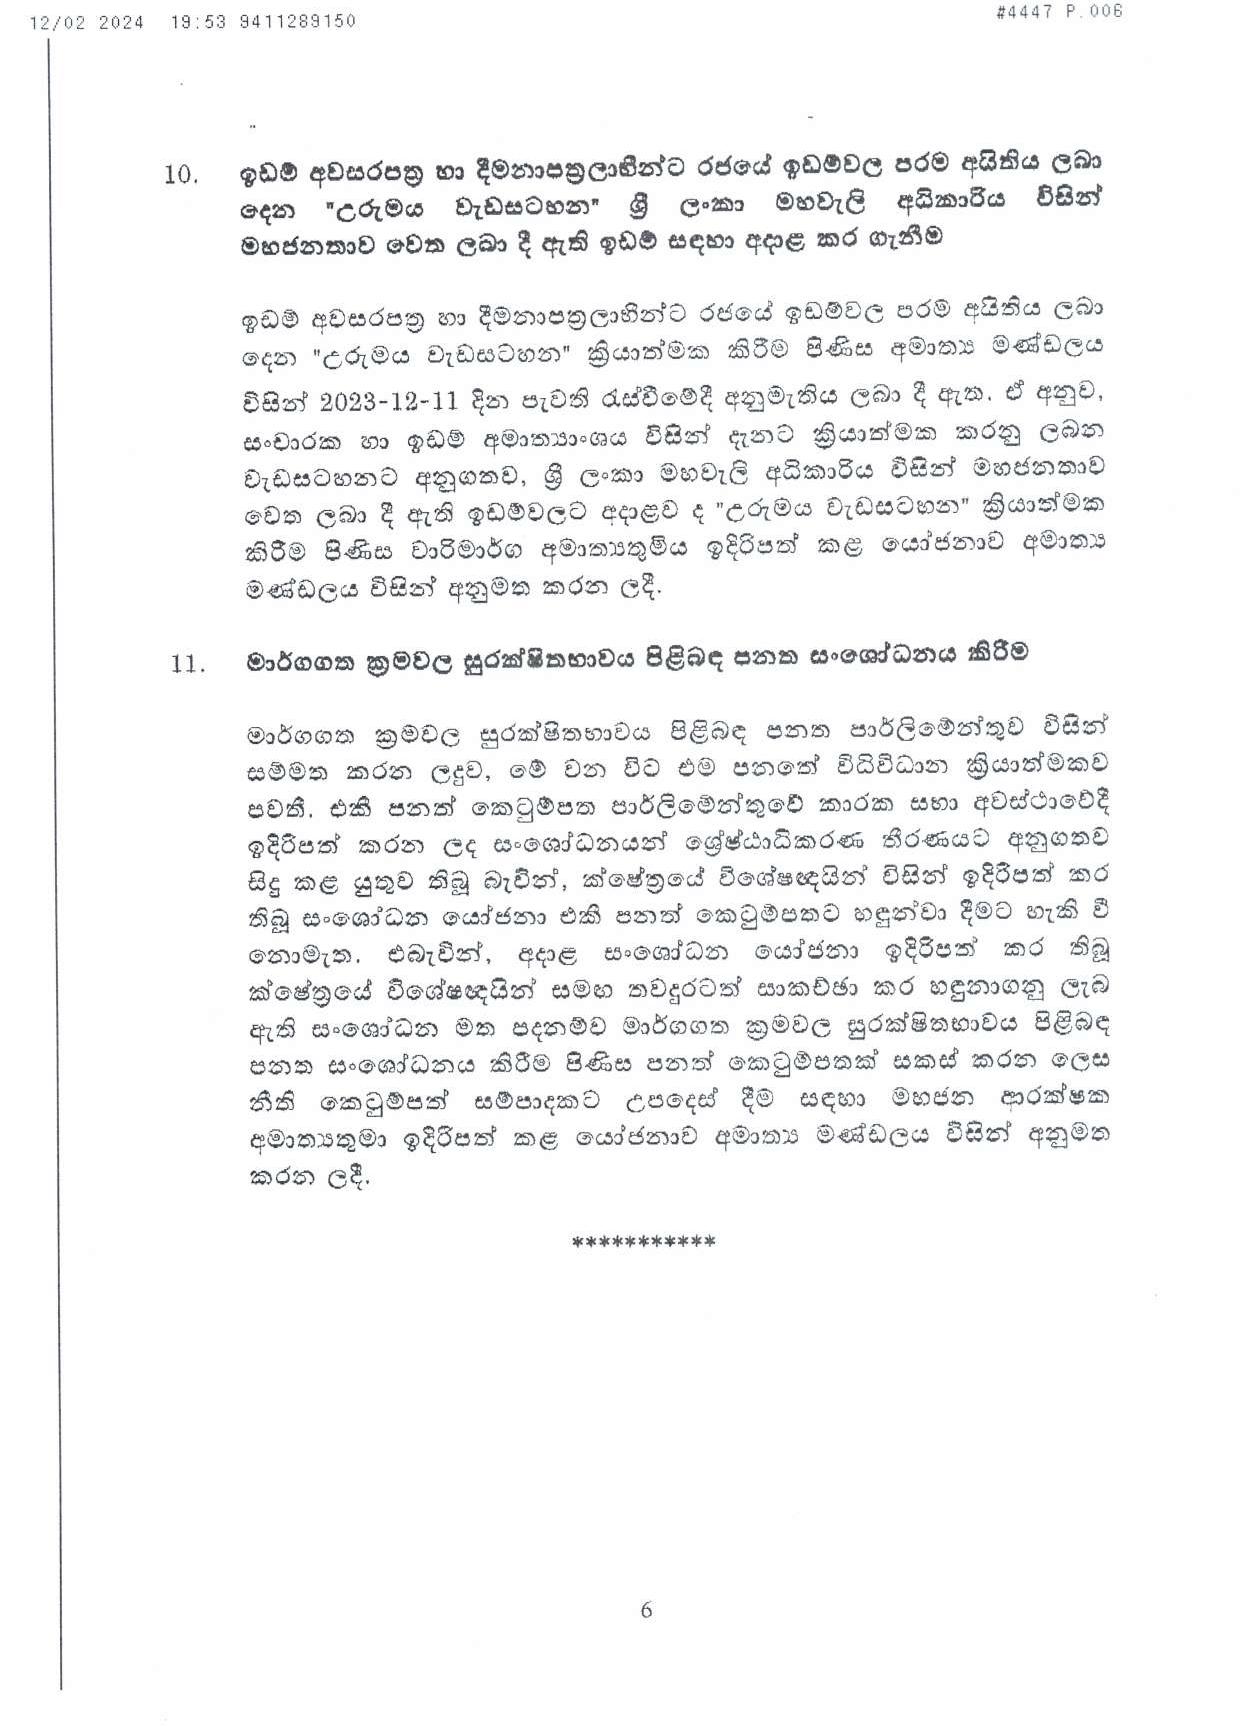 Cabient Decision on 12.02.2024 page 006